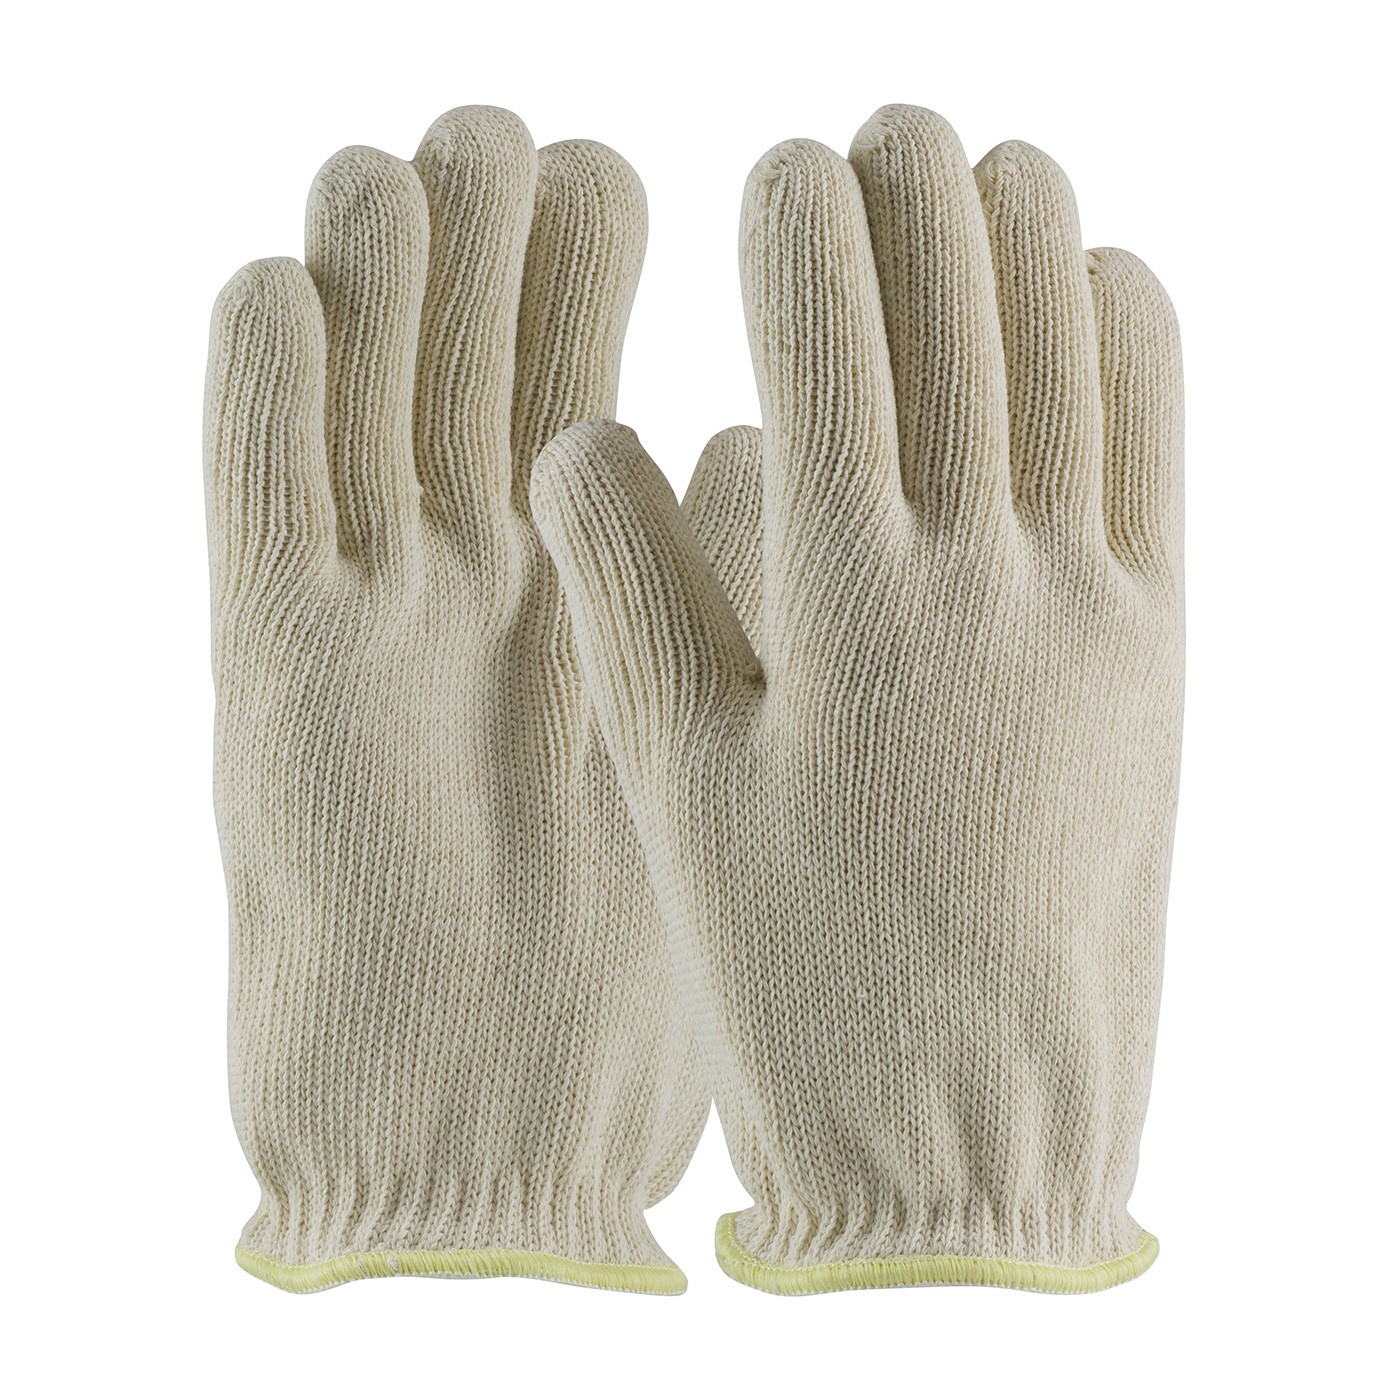 PIP® Double-Layered Cotton Seamless Knit Hot Mill Glove - 24 oz  (#43-500)